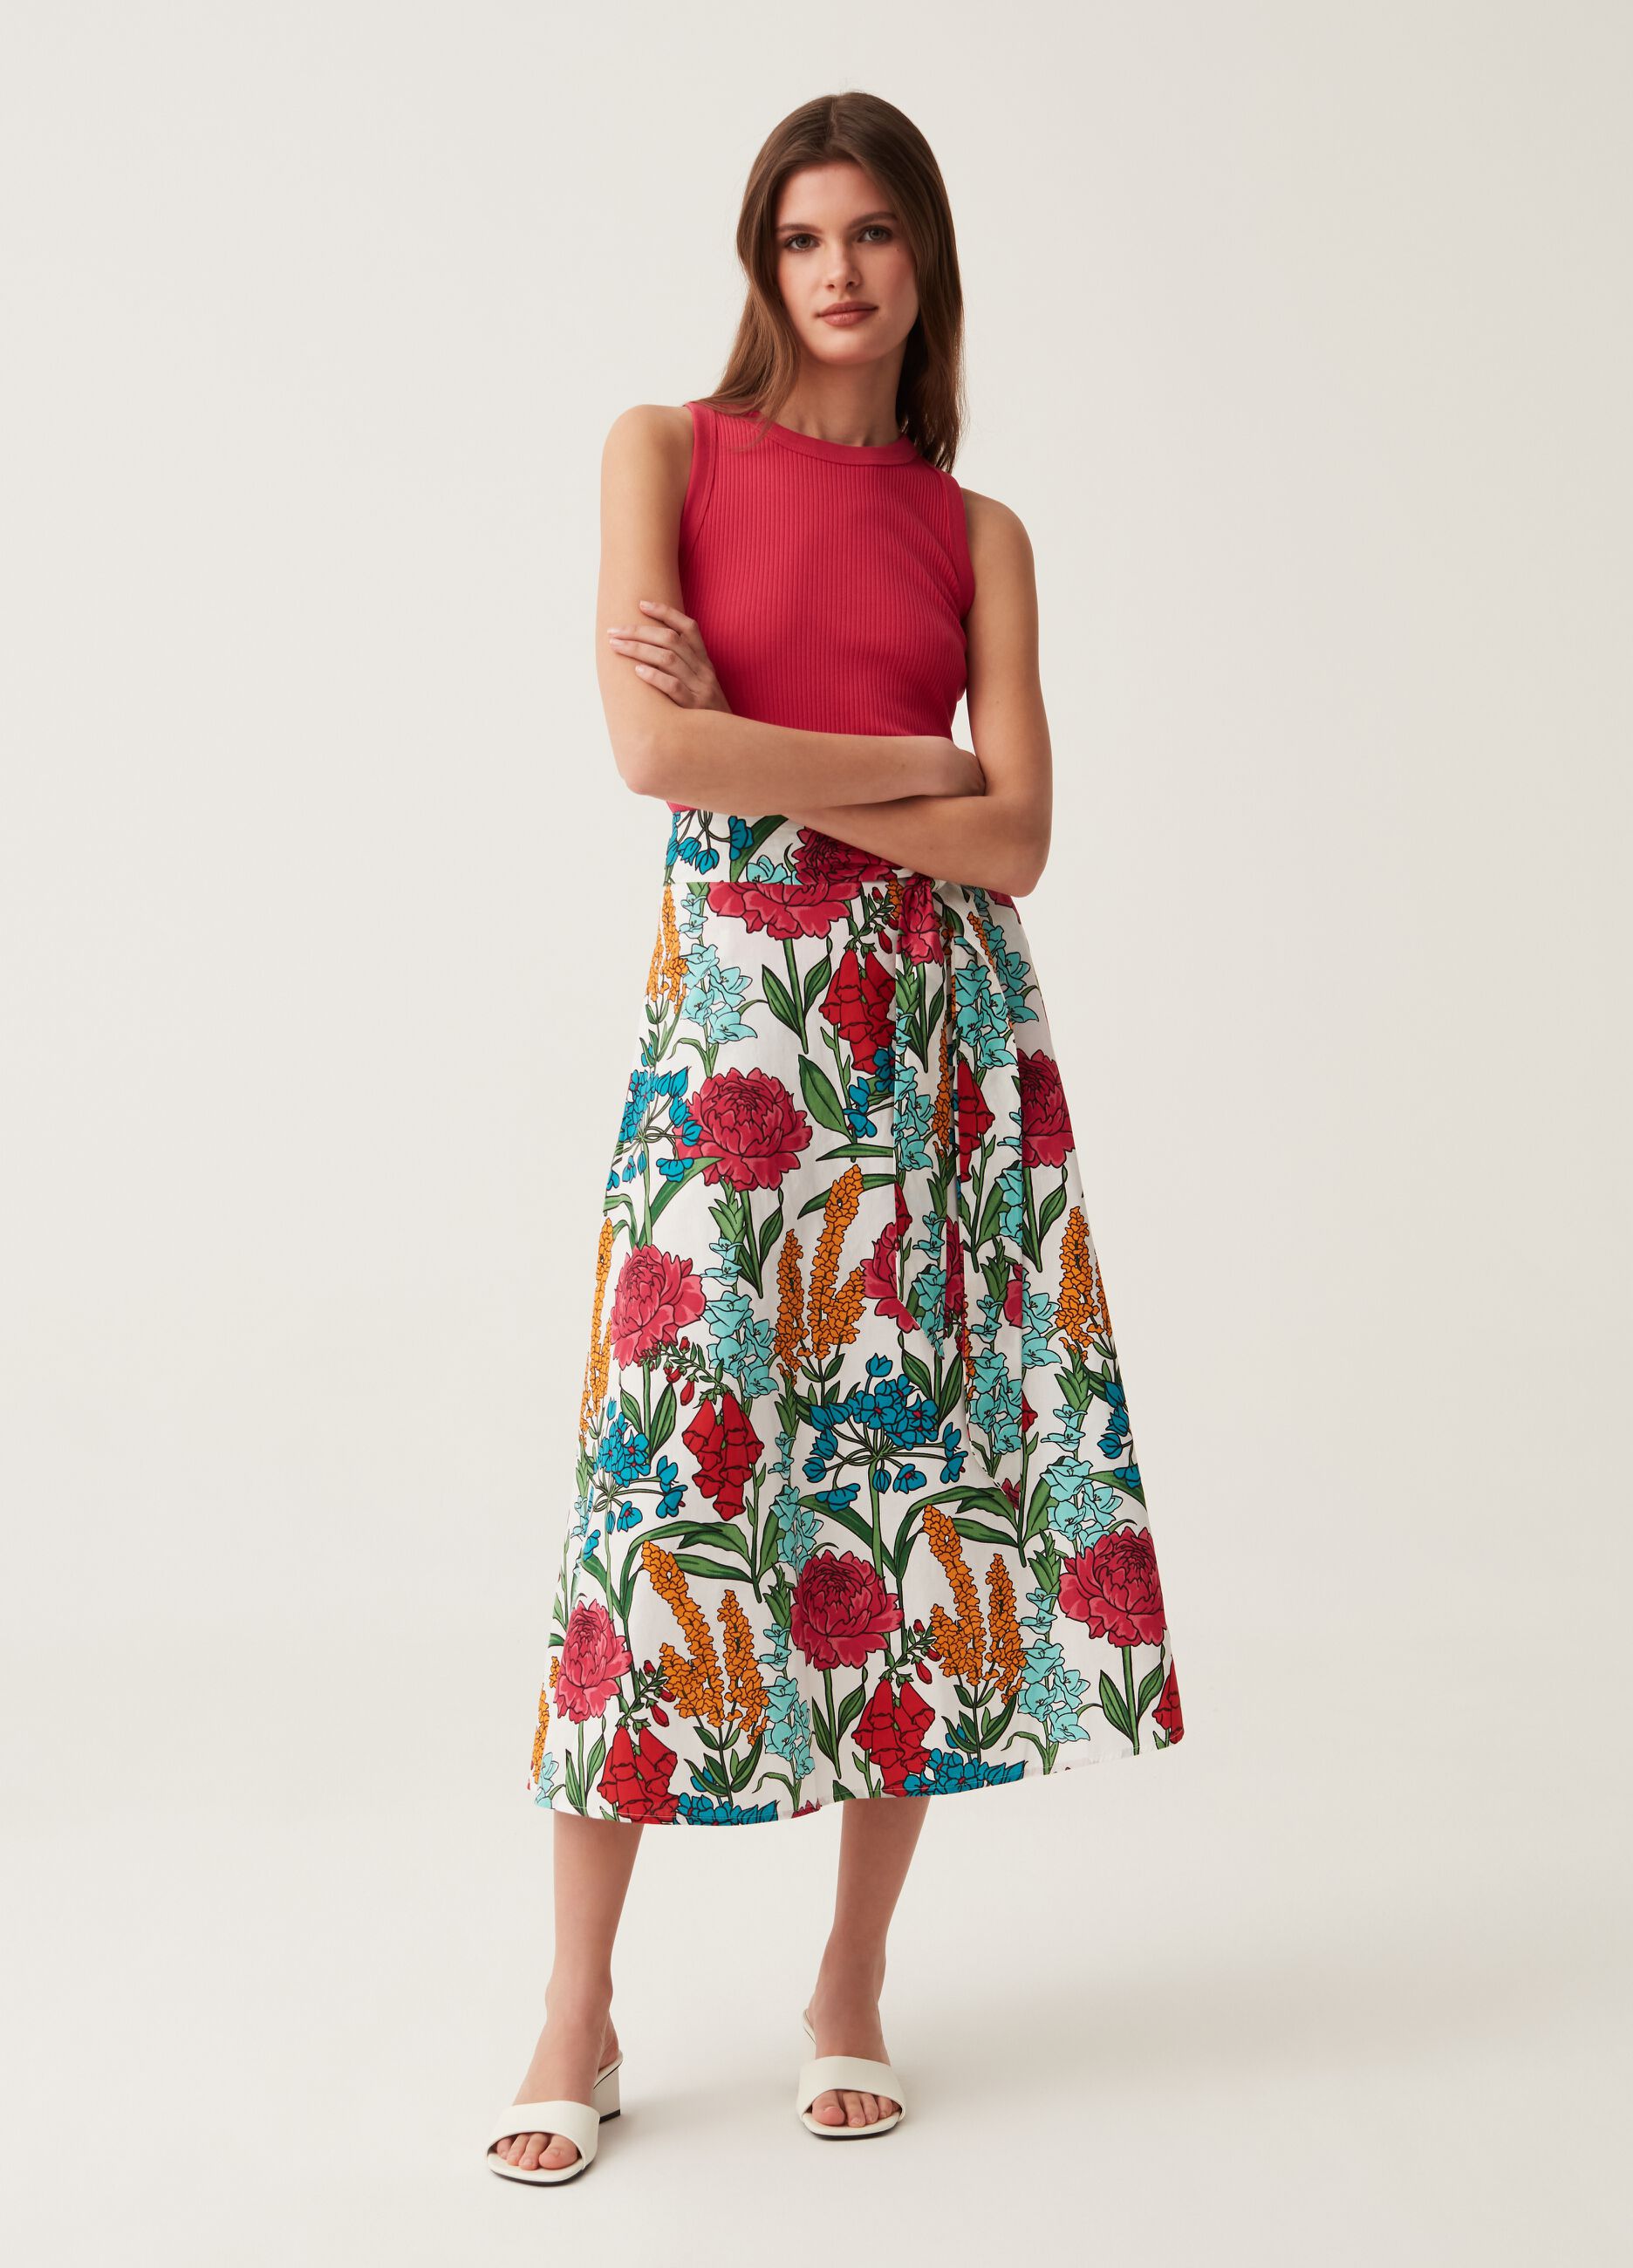 Midi skirt with floral print